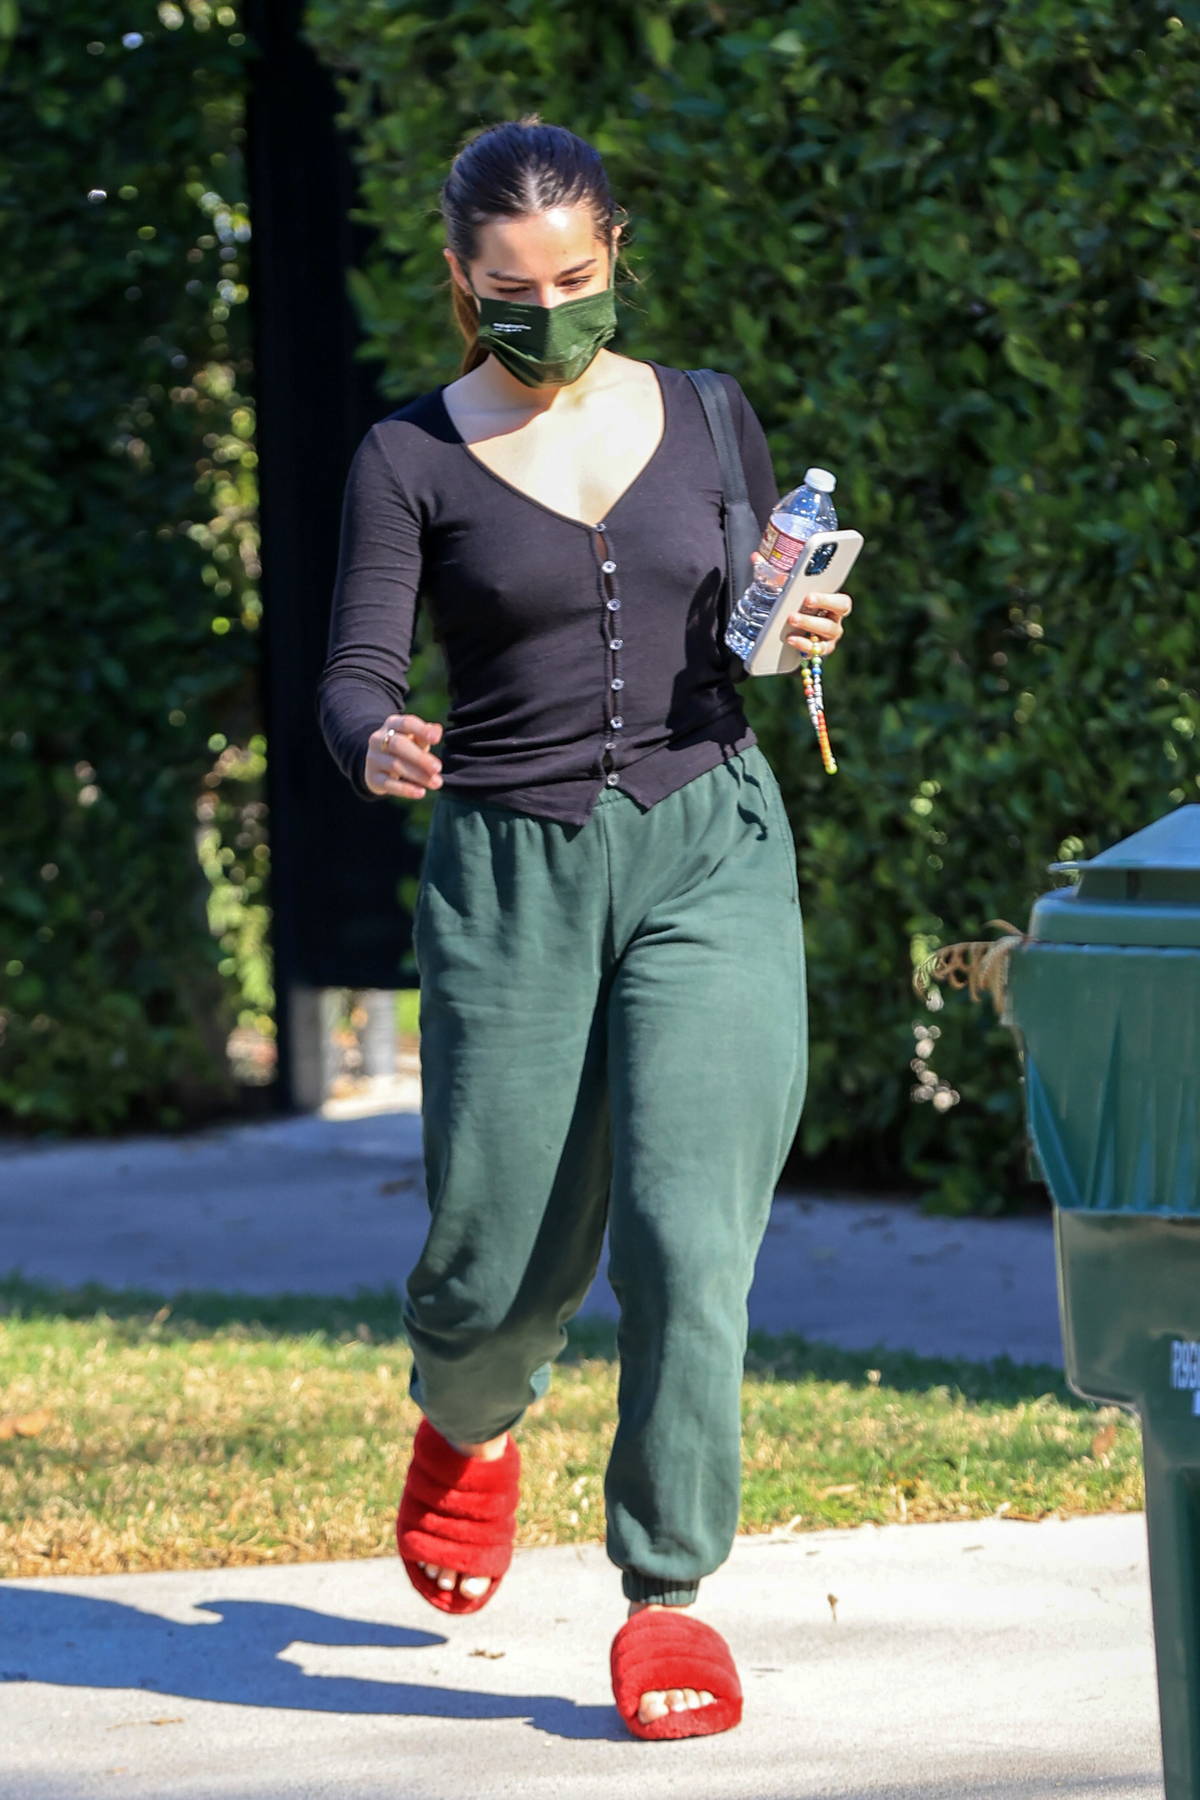 addison rae looks comfy in a black top, green sweatpants and red